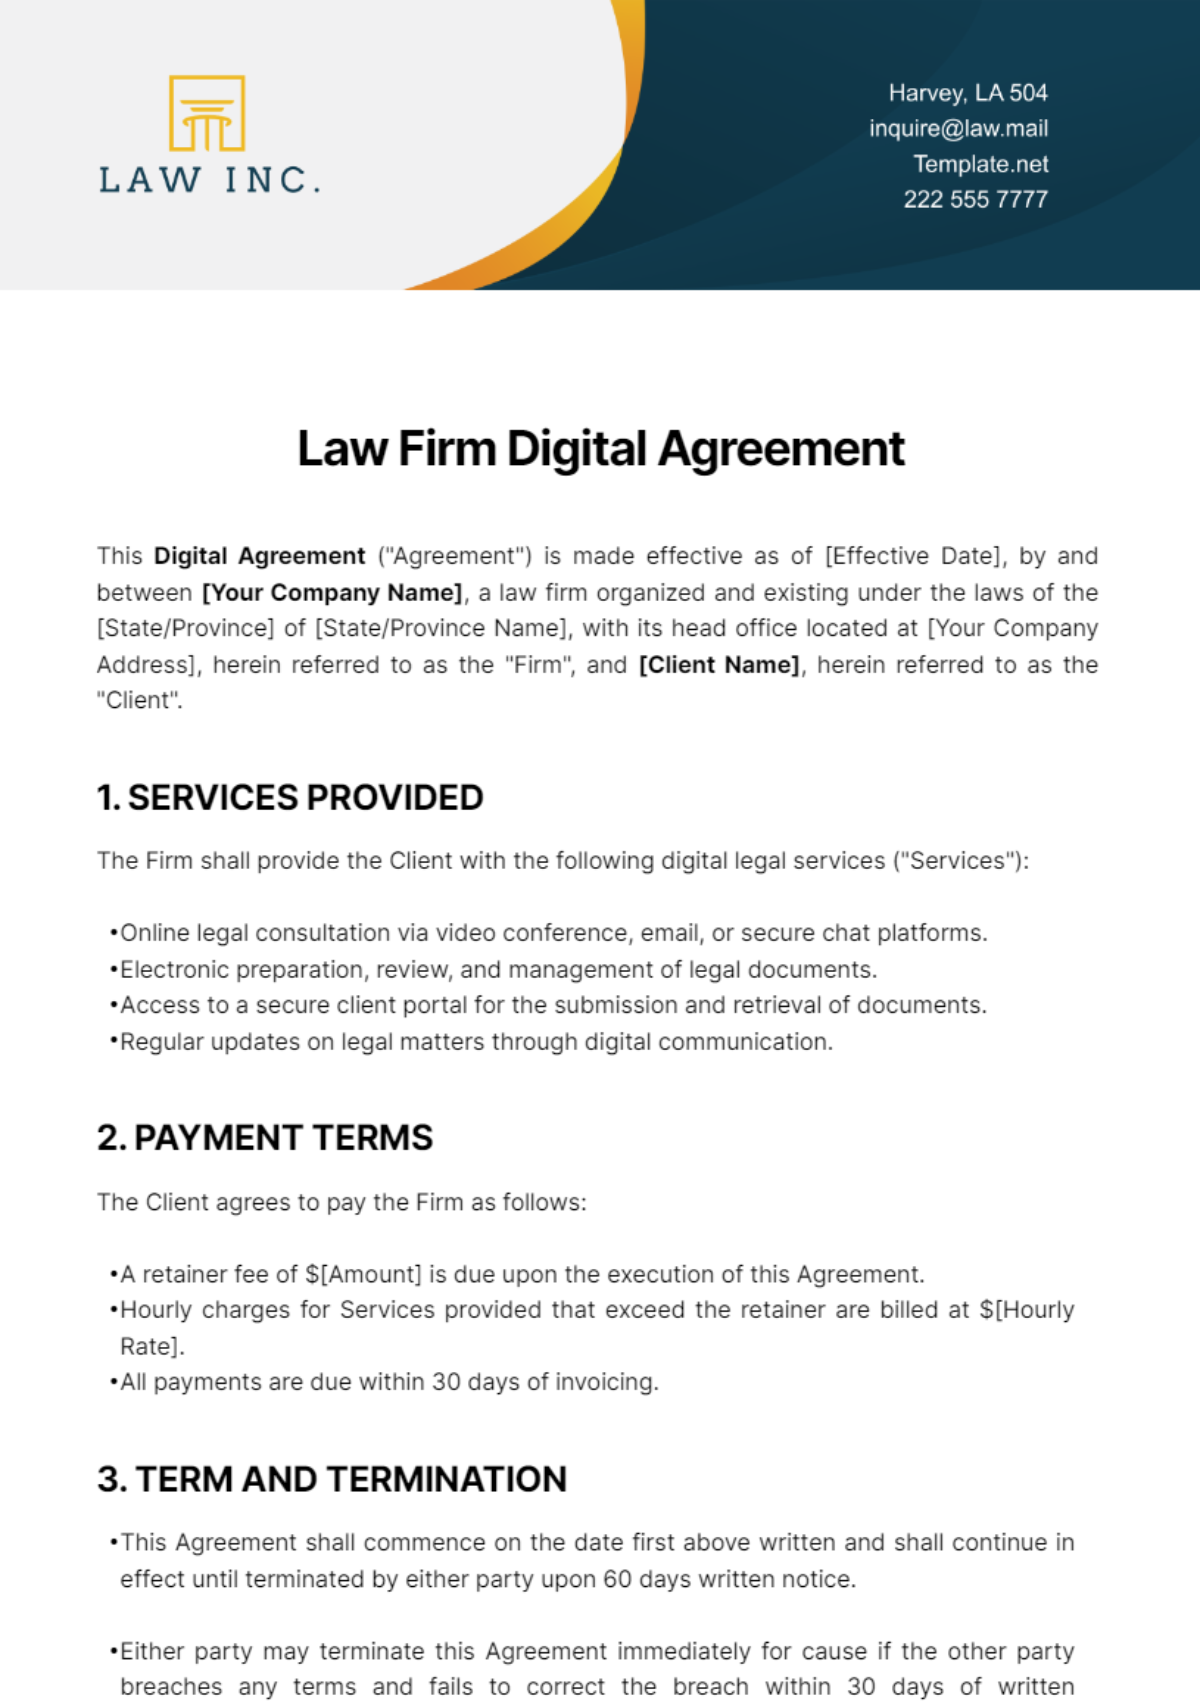 Free Law Firm Digital Agreement Template